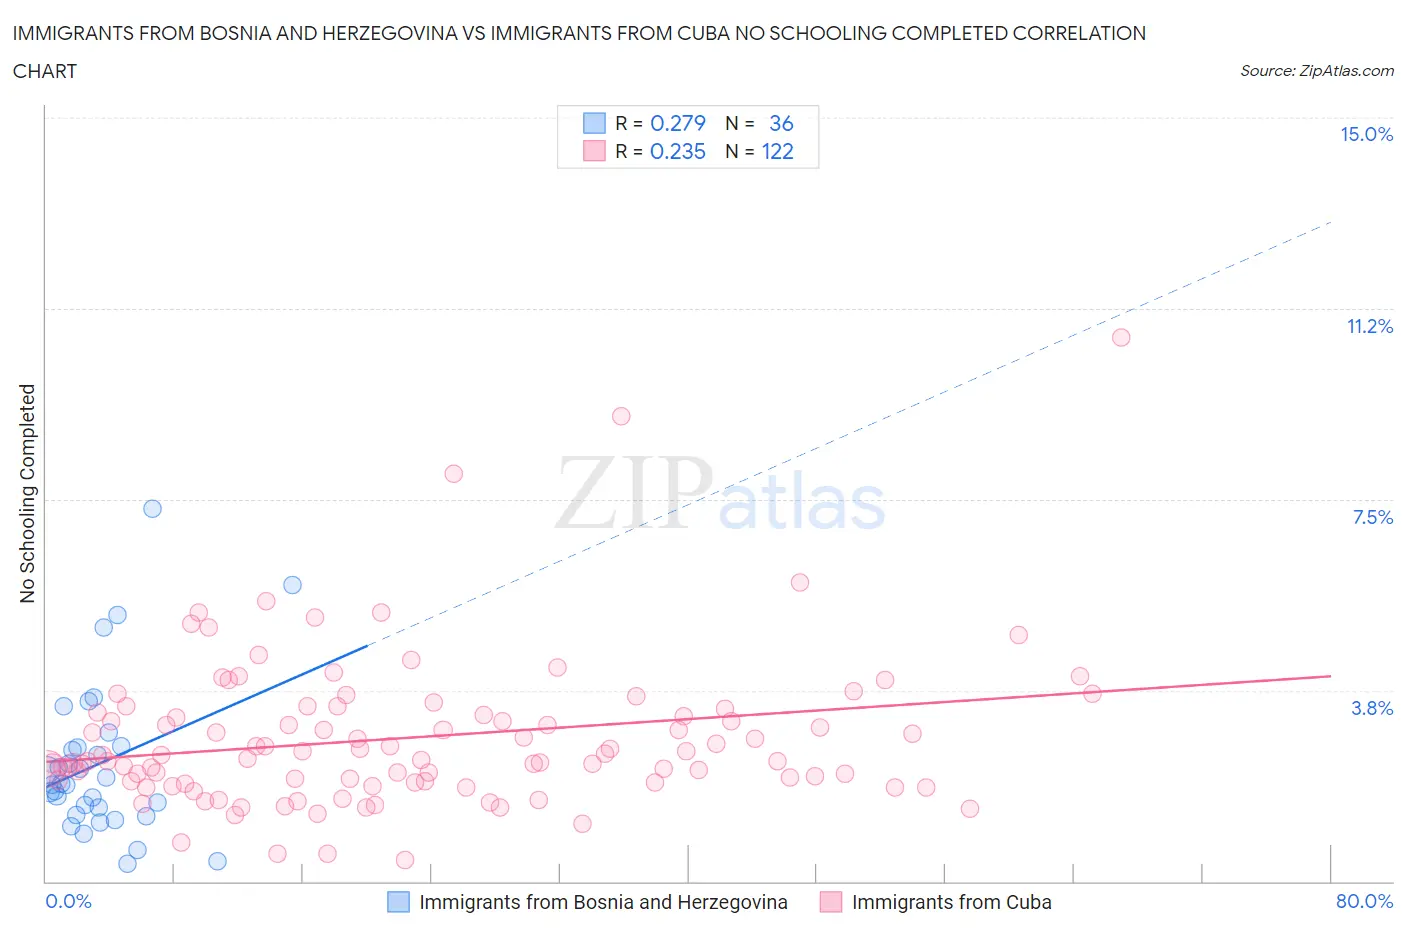 Immigrants from Bosnia and Herzegovina vs Immigrants from Cuba No Schooling Completed